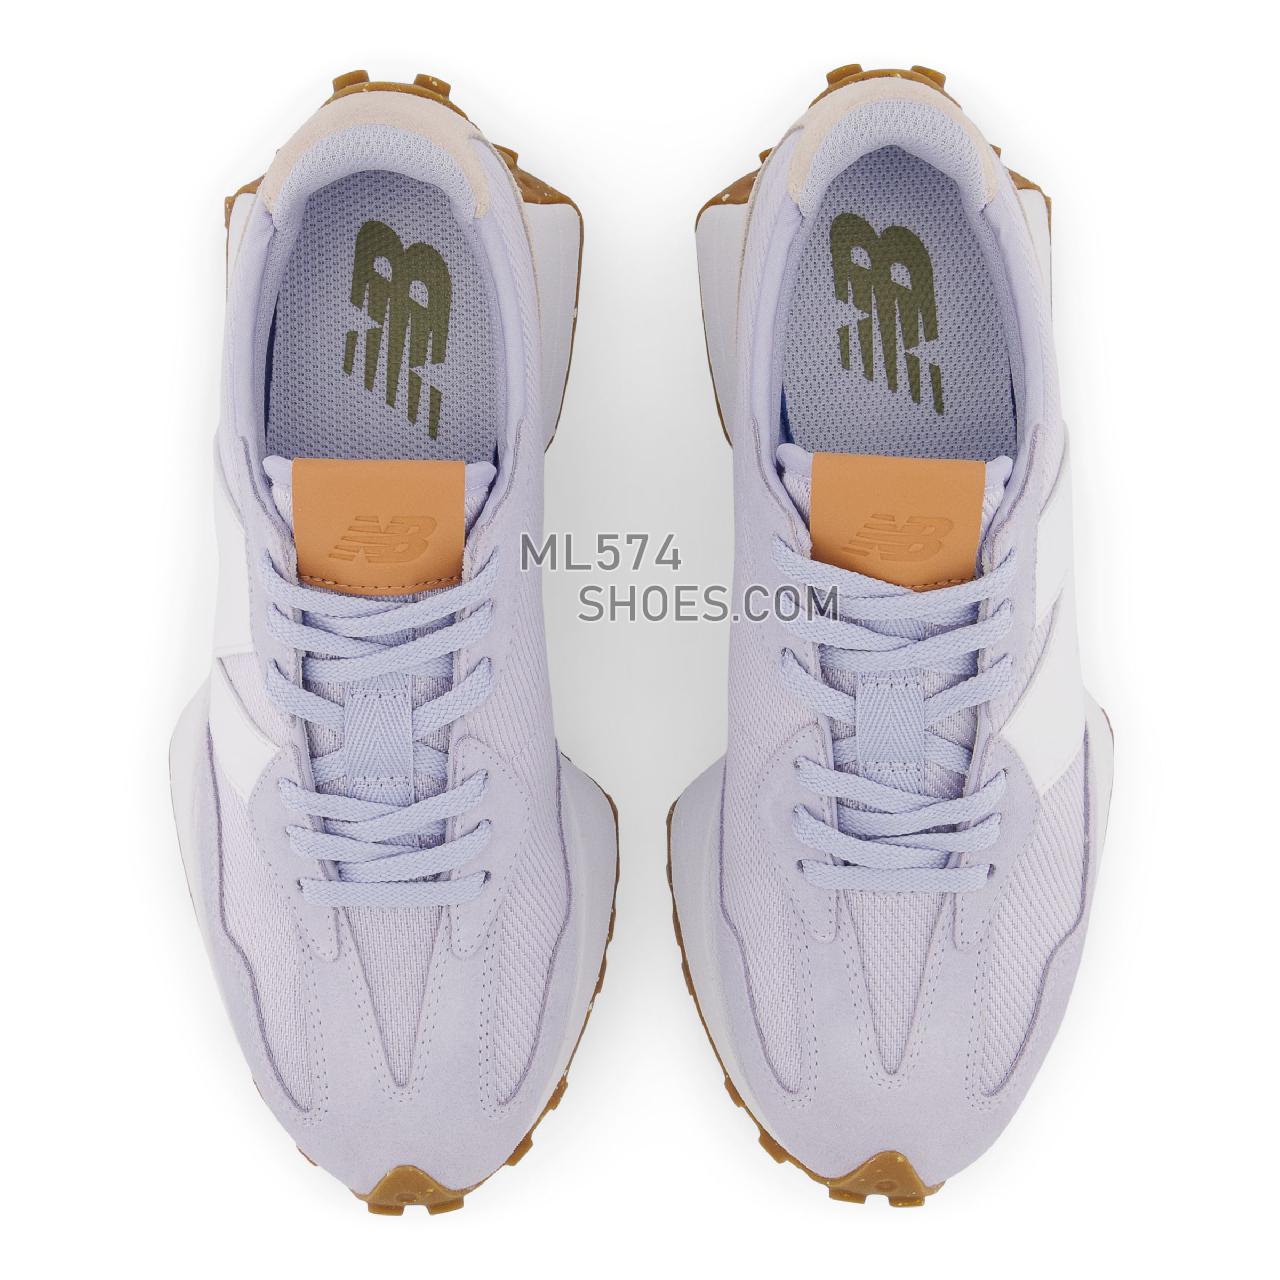 New Balance 327 - Women's Sport Style Sneakers - Violet Haze with Macadamia Nut - WS327RC